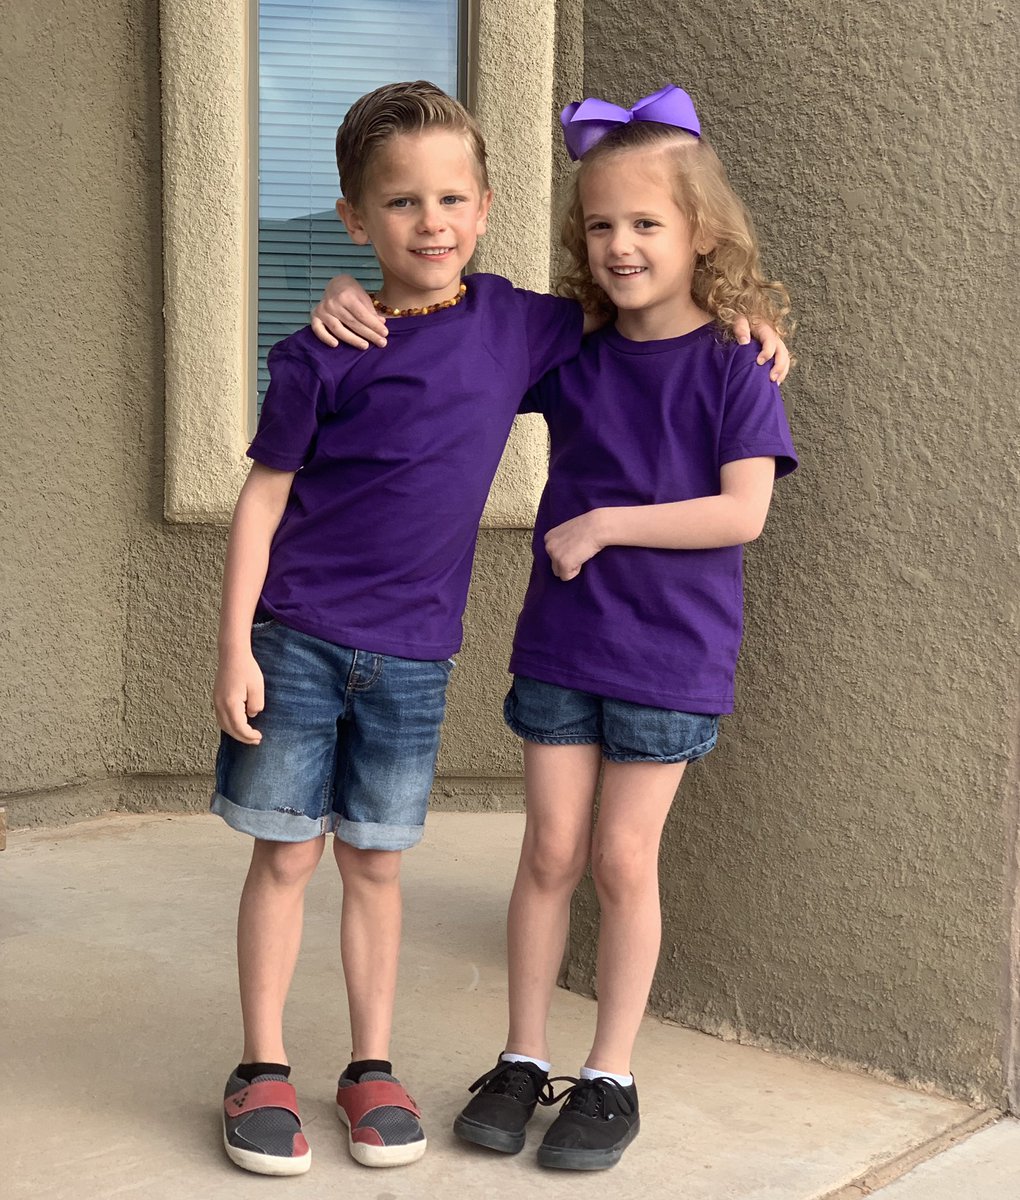 Today we wear purple to support our #MilitaryKids 💜💜 They are stronger than they’ll ever know. Thank you @SGTCarrasco_ES for supporting our kids and giving them a safe place to feel at home! #TeamSISD #JCE #PurpleUpDay #theyservetoo #BuffaloStrong